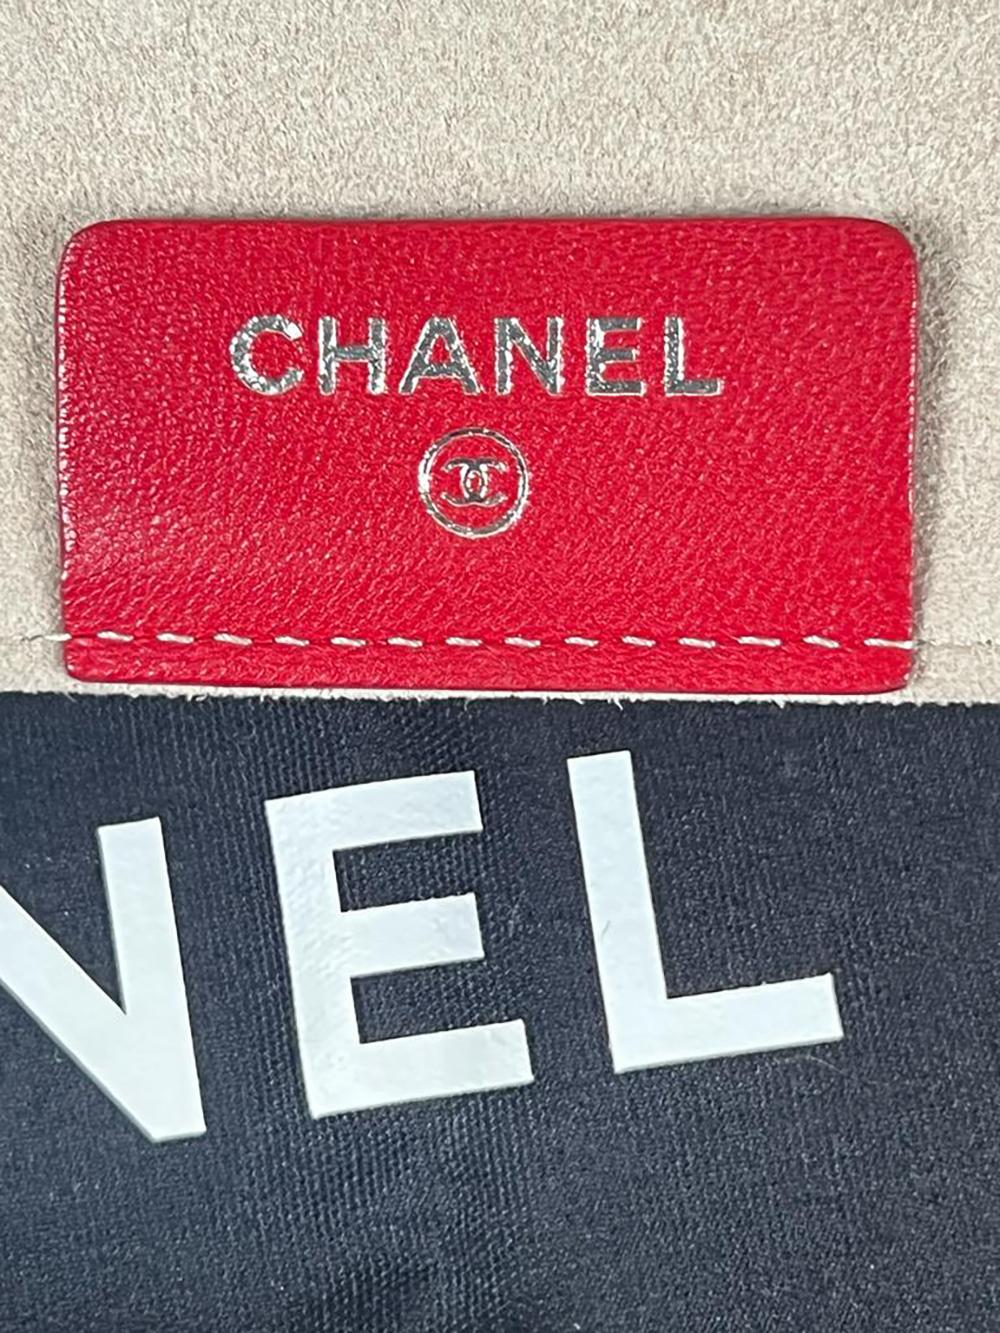 Chanel CC Camellia Red Quilted Clutch For Sale 8